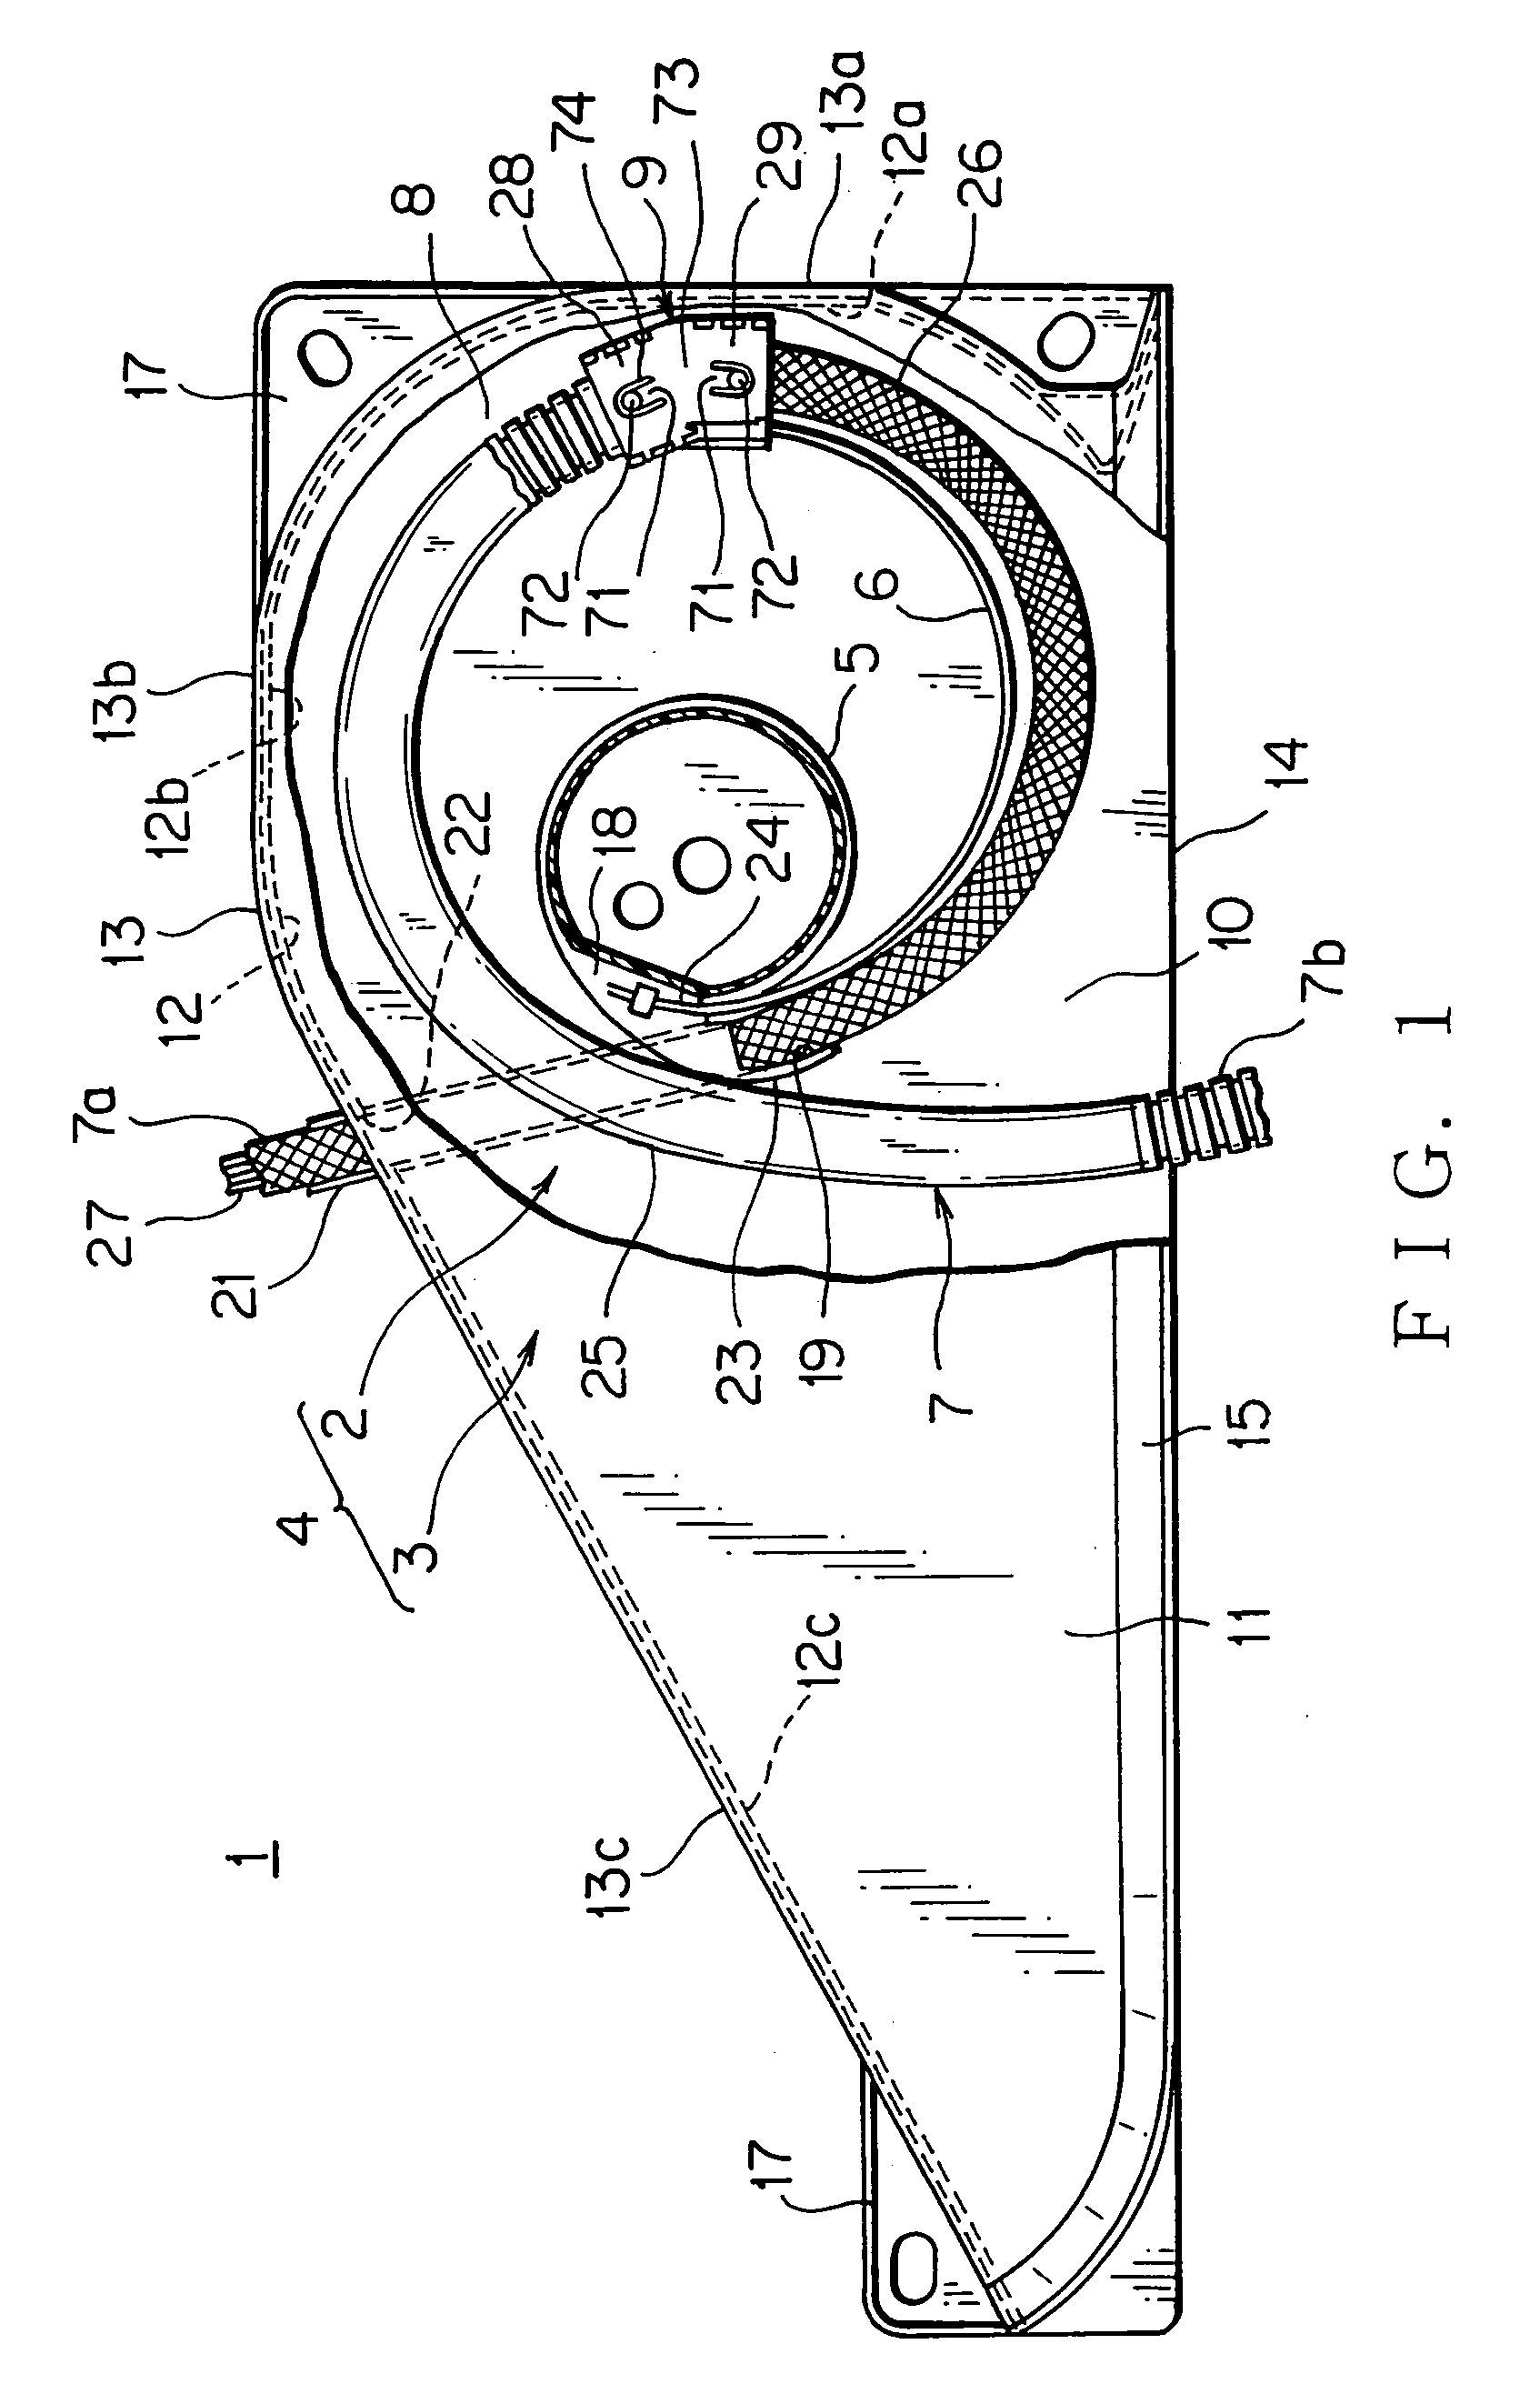 Continuous power supply device